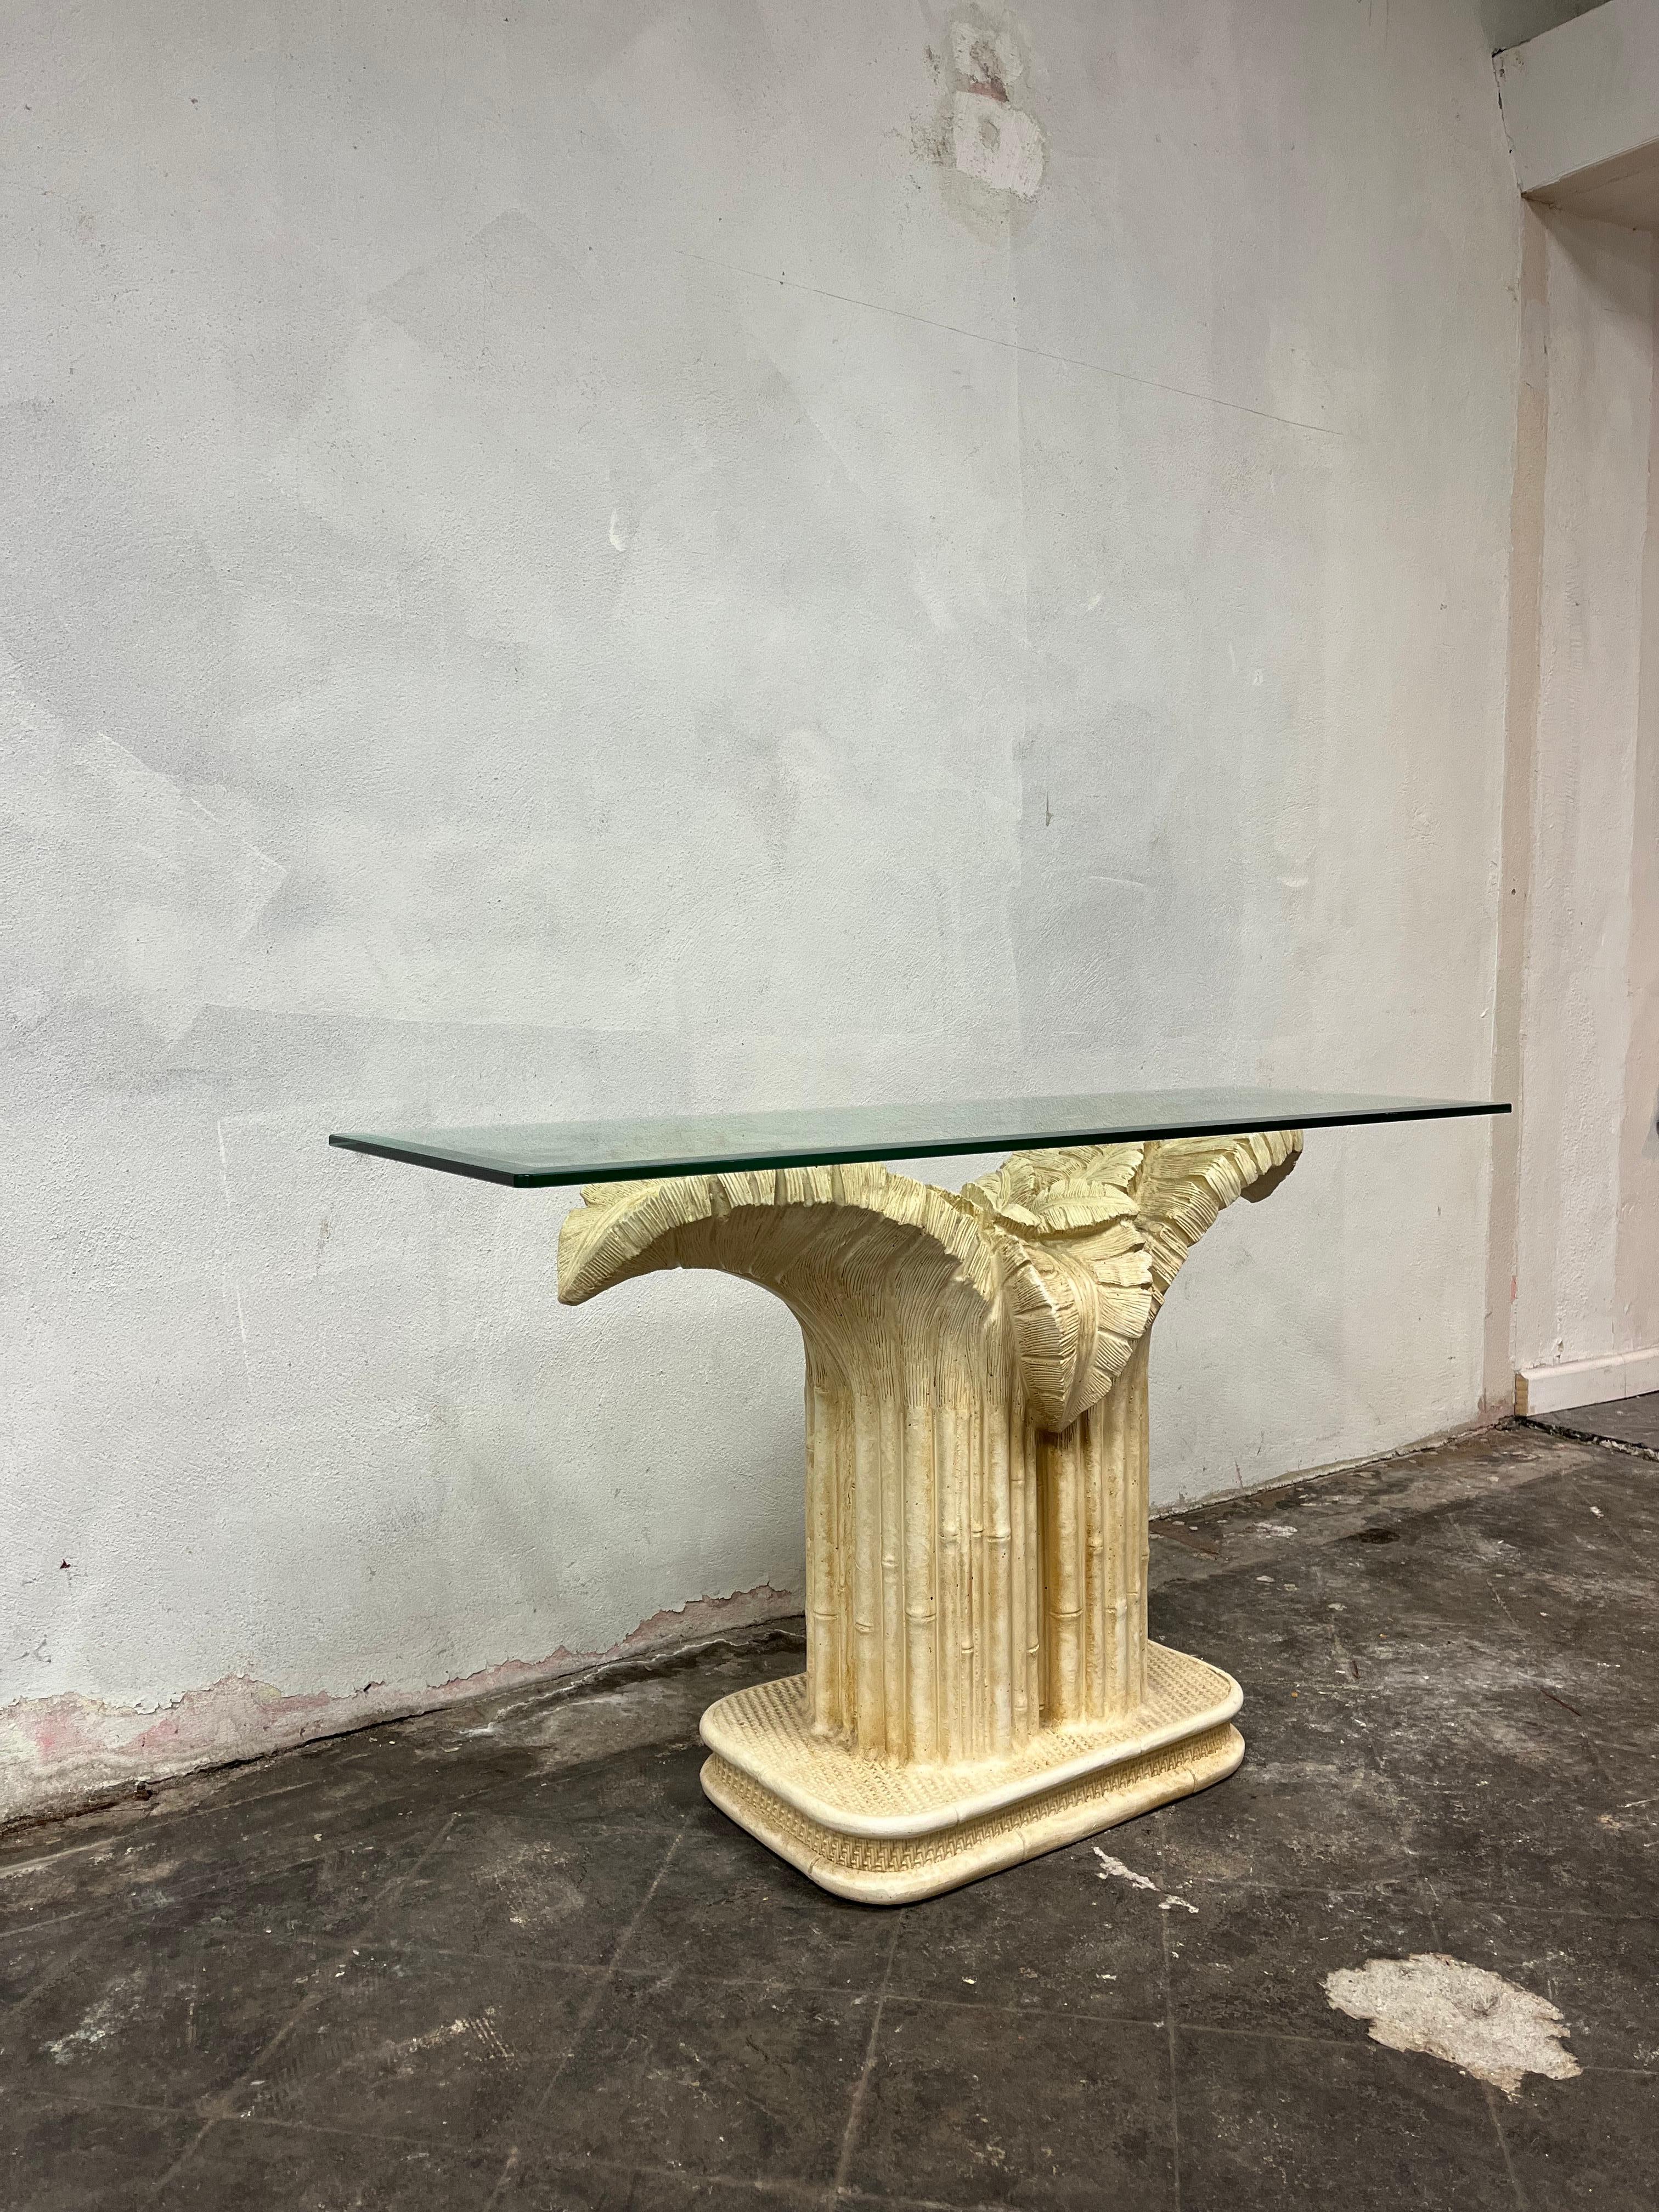 Console table sculpted in the form of large palm leaves. Based on the style of Serge Roche or Dorothy Draper. Console features dramatic tropical palm tree designed pedestal with scalloped edge glass top. Excellent condition.
Table base measures 38